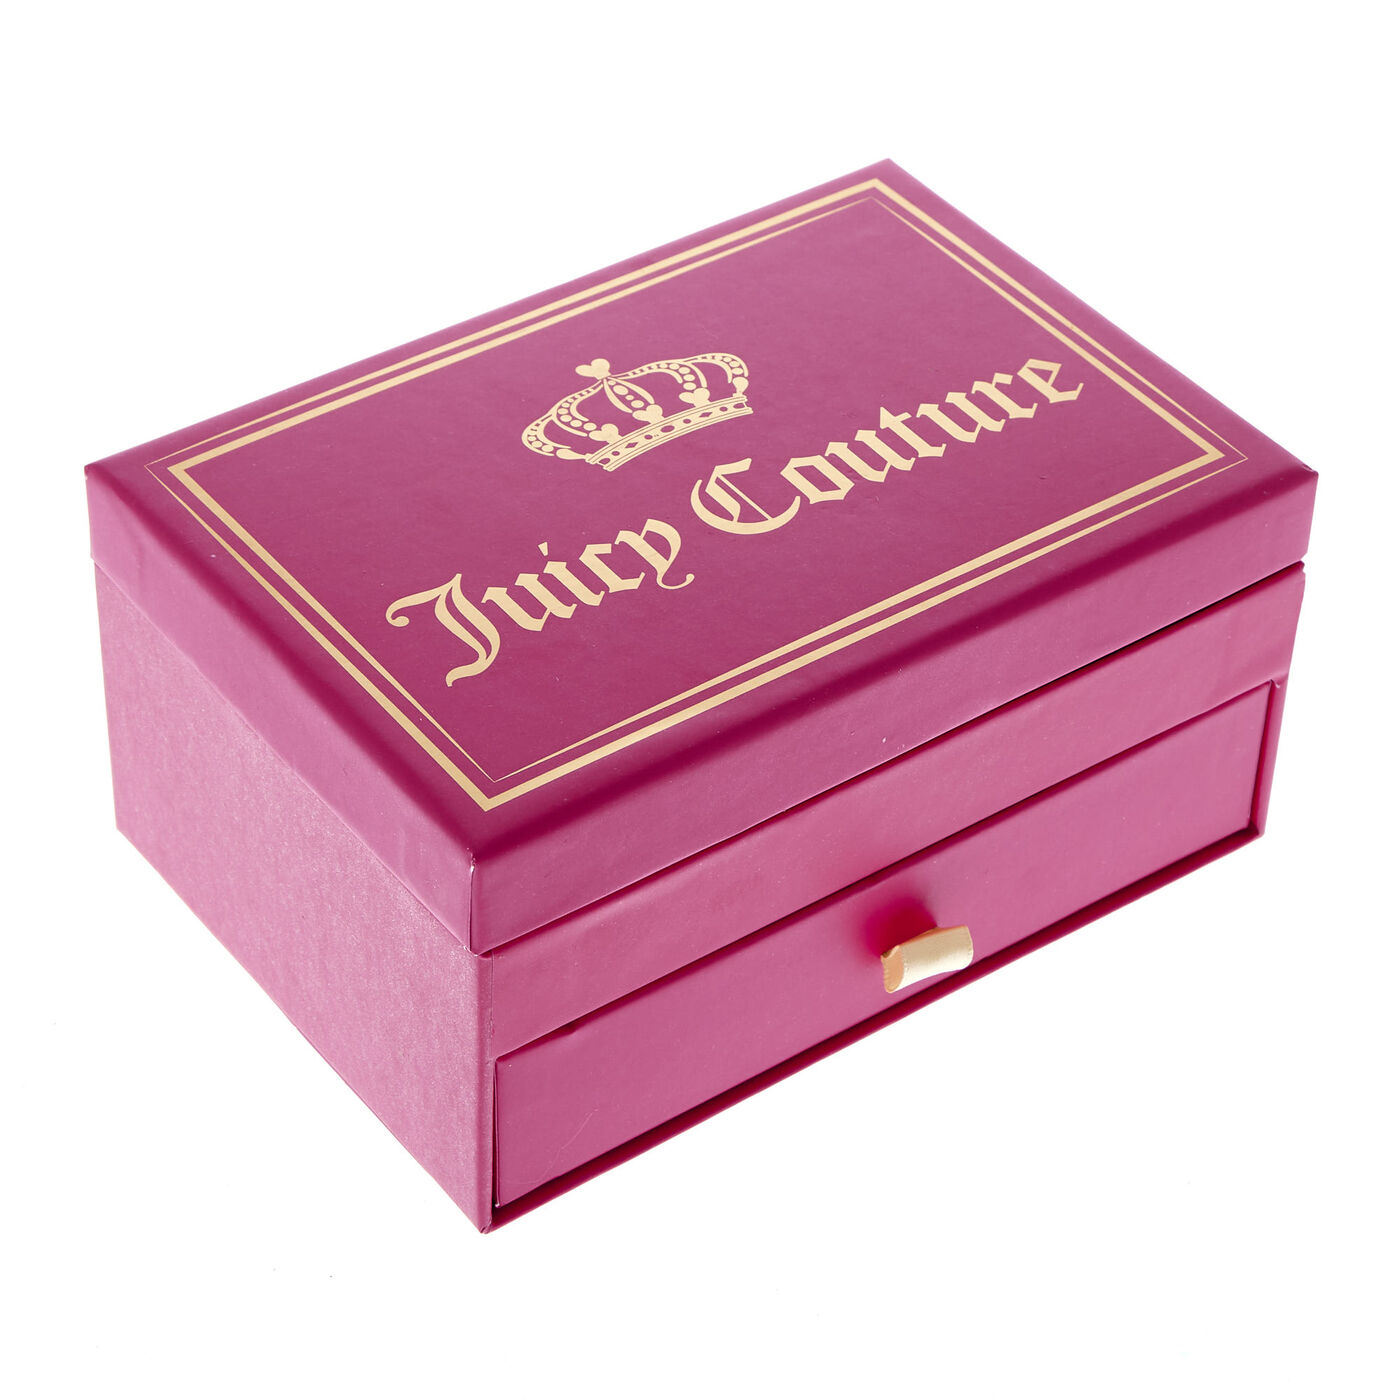 Buy Juicy Couture Glamour Box Jewellery Box for GBP 11.99